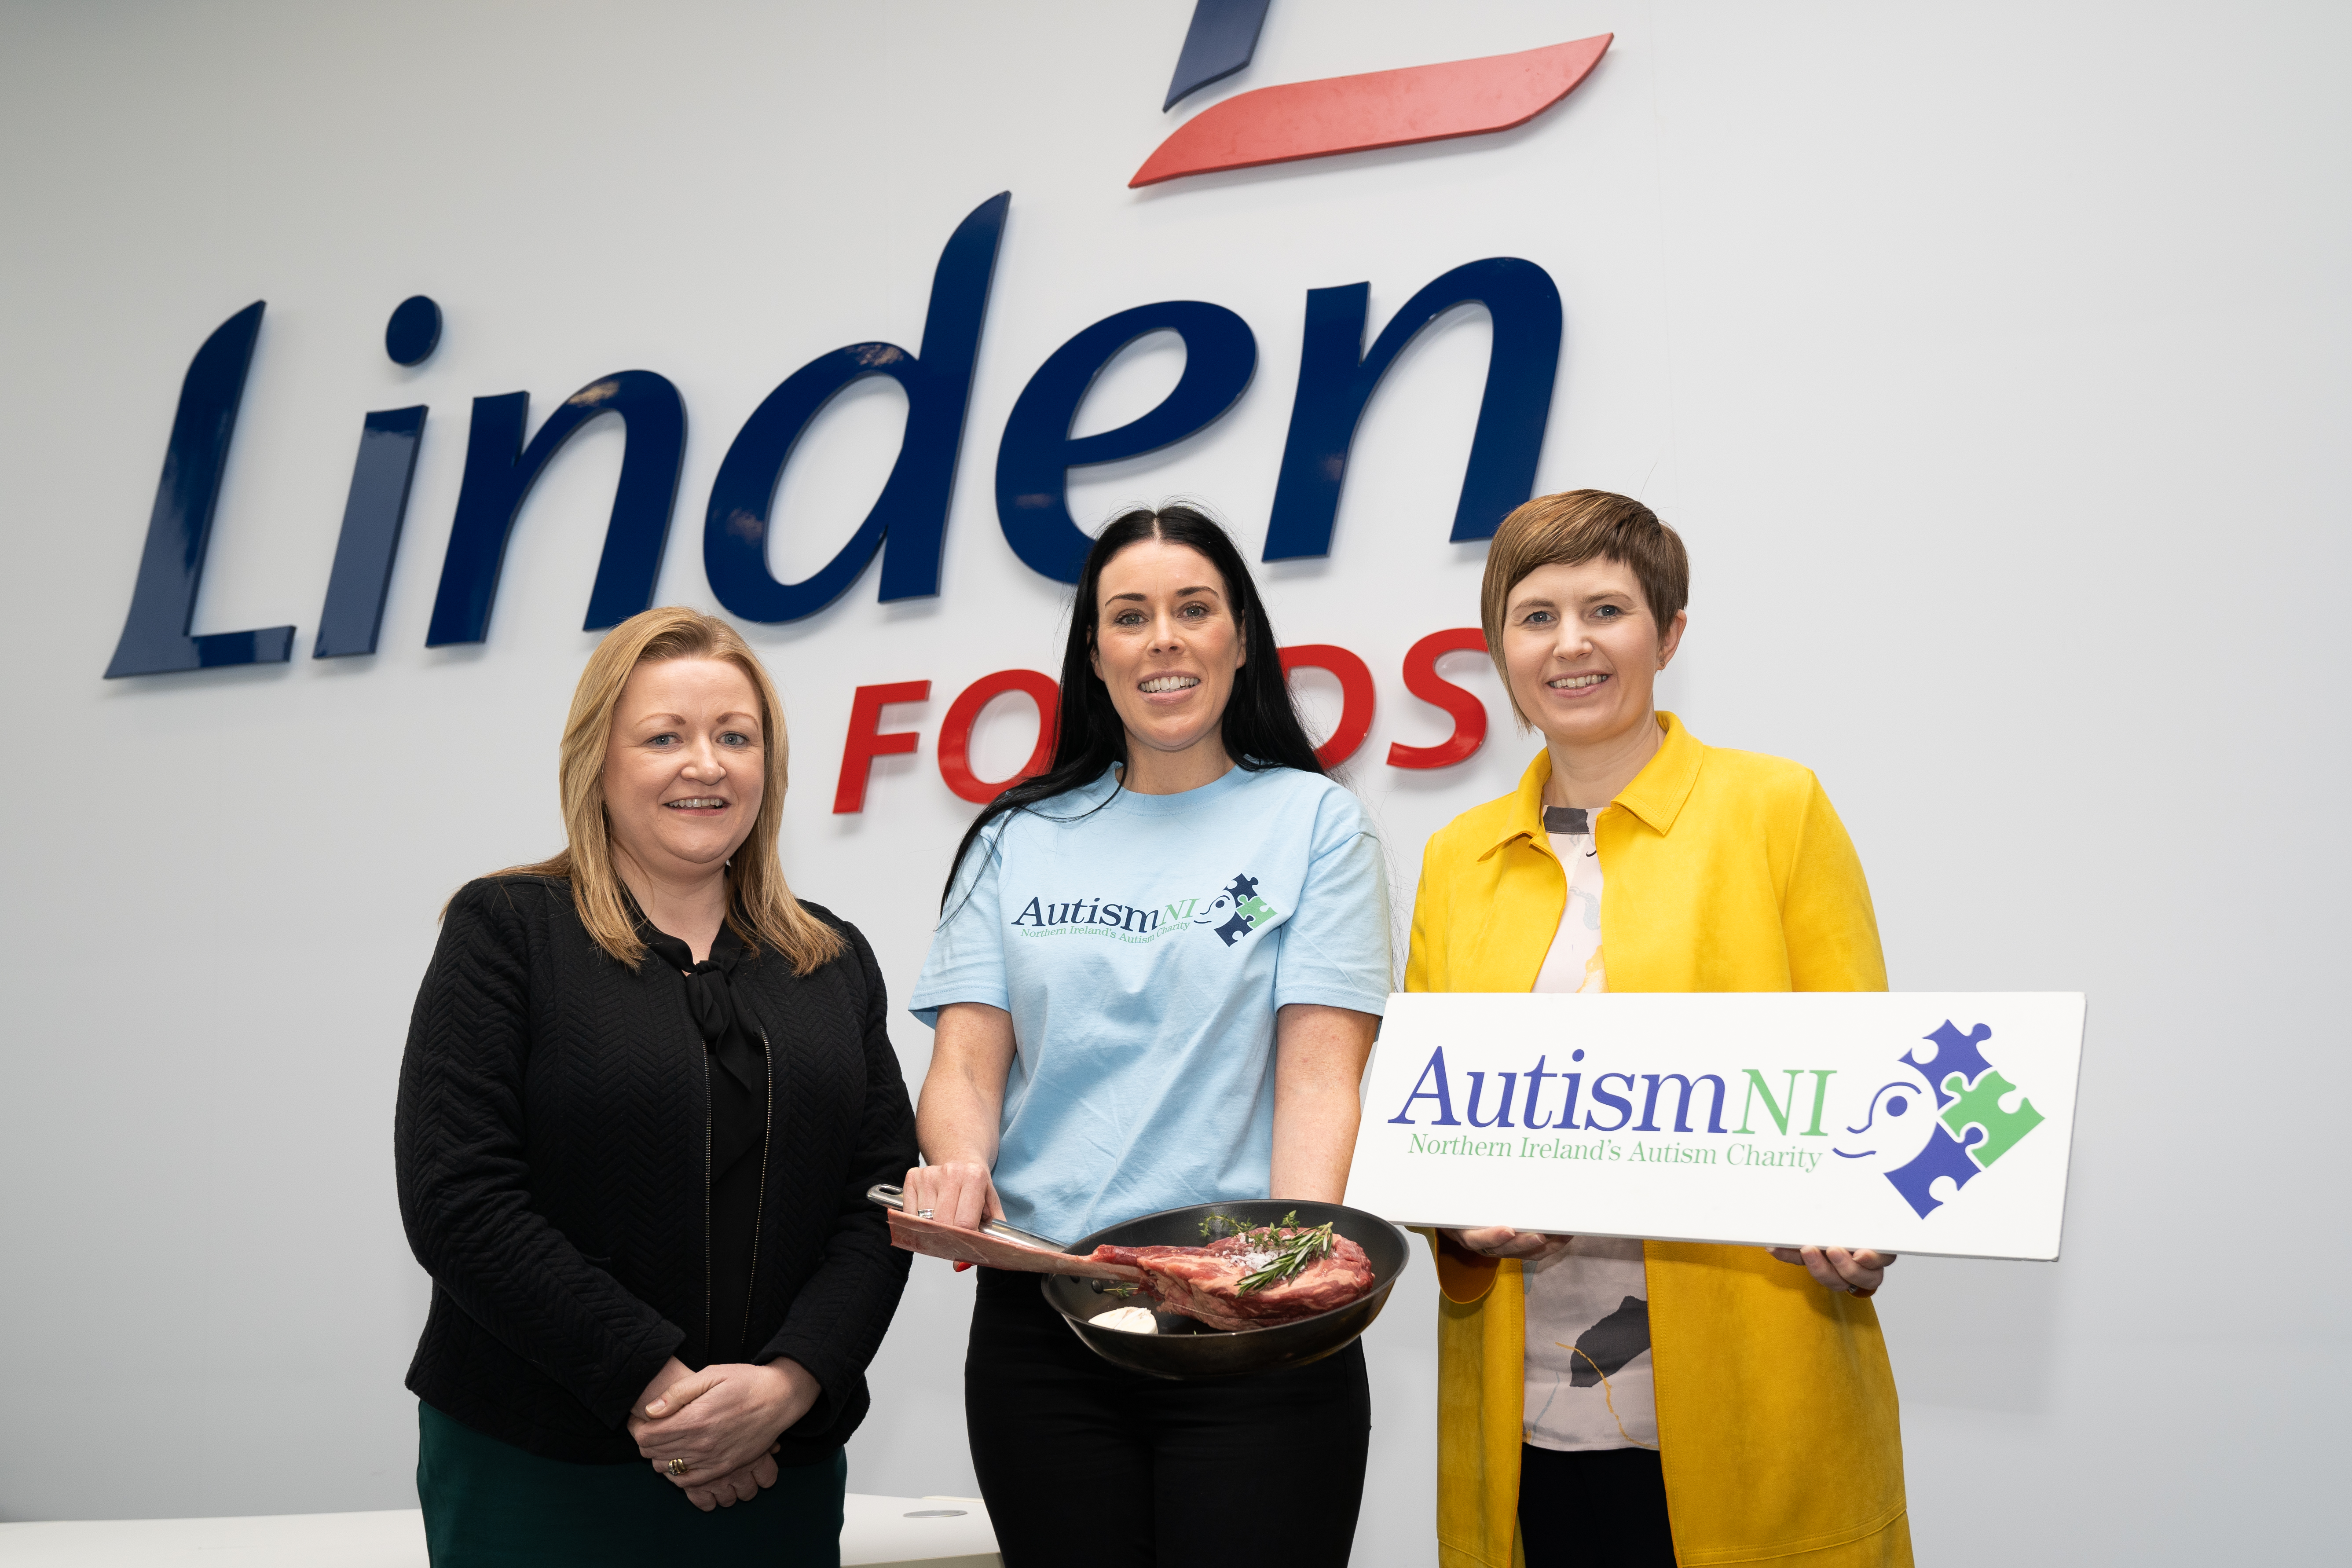 Linden Foods to make a ‘sizzling’ success of new charity partnership